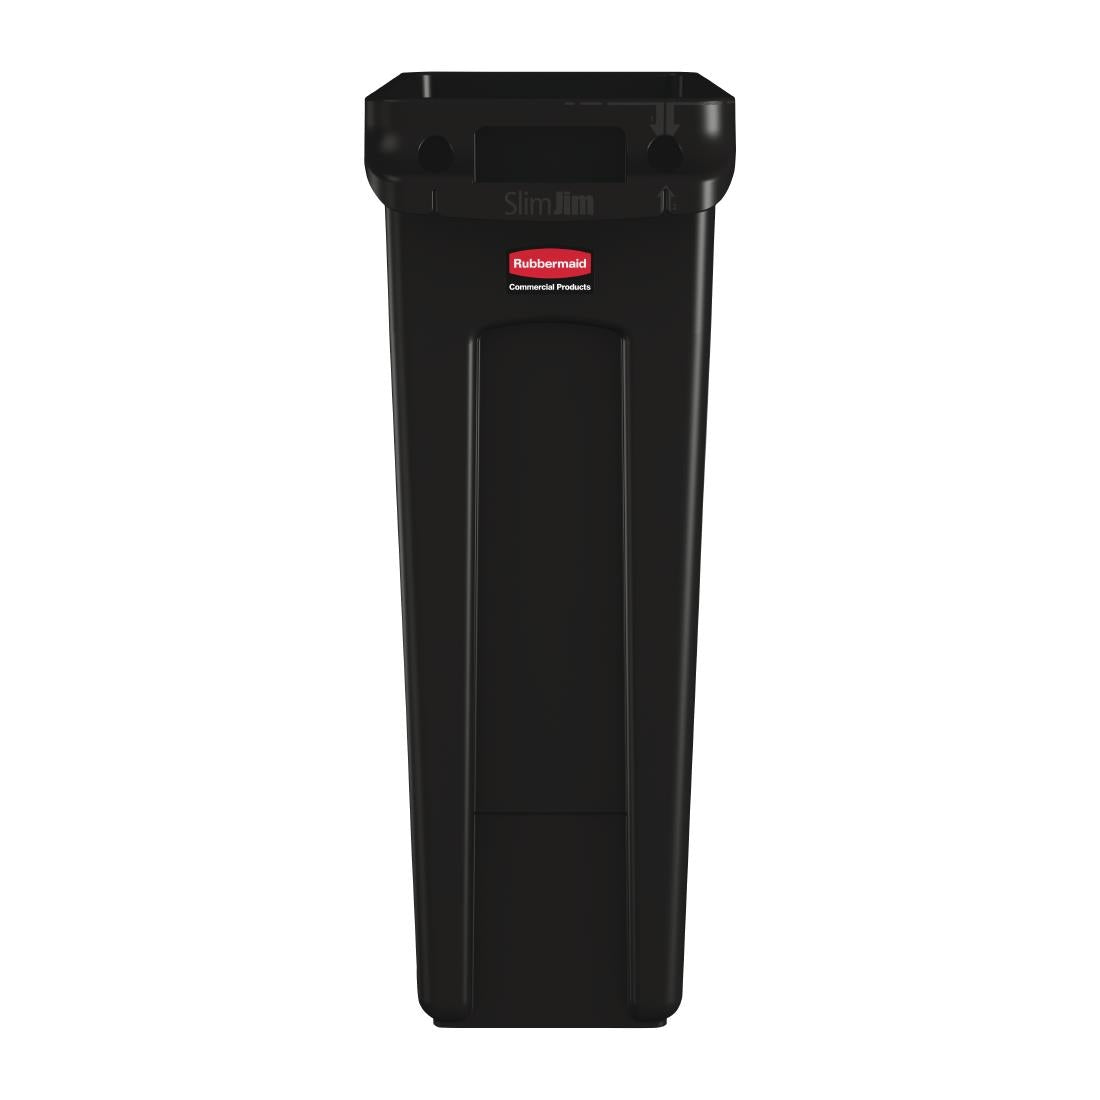 CP653 Rubbermaid Slim Jim Container With Venting Channels Black 87Ltr